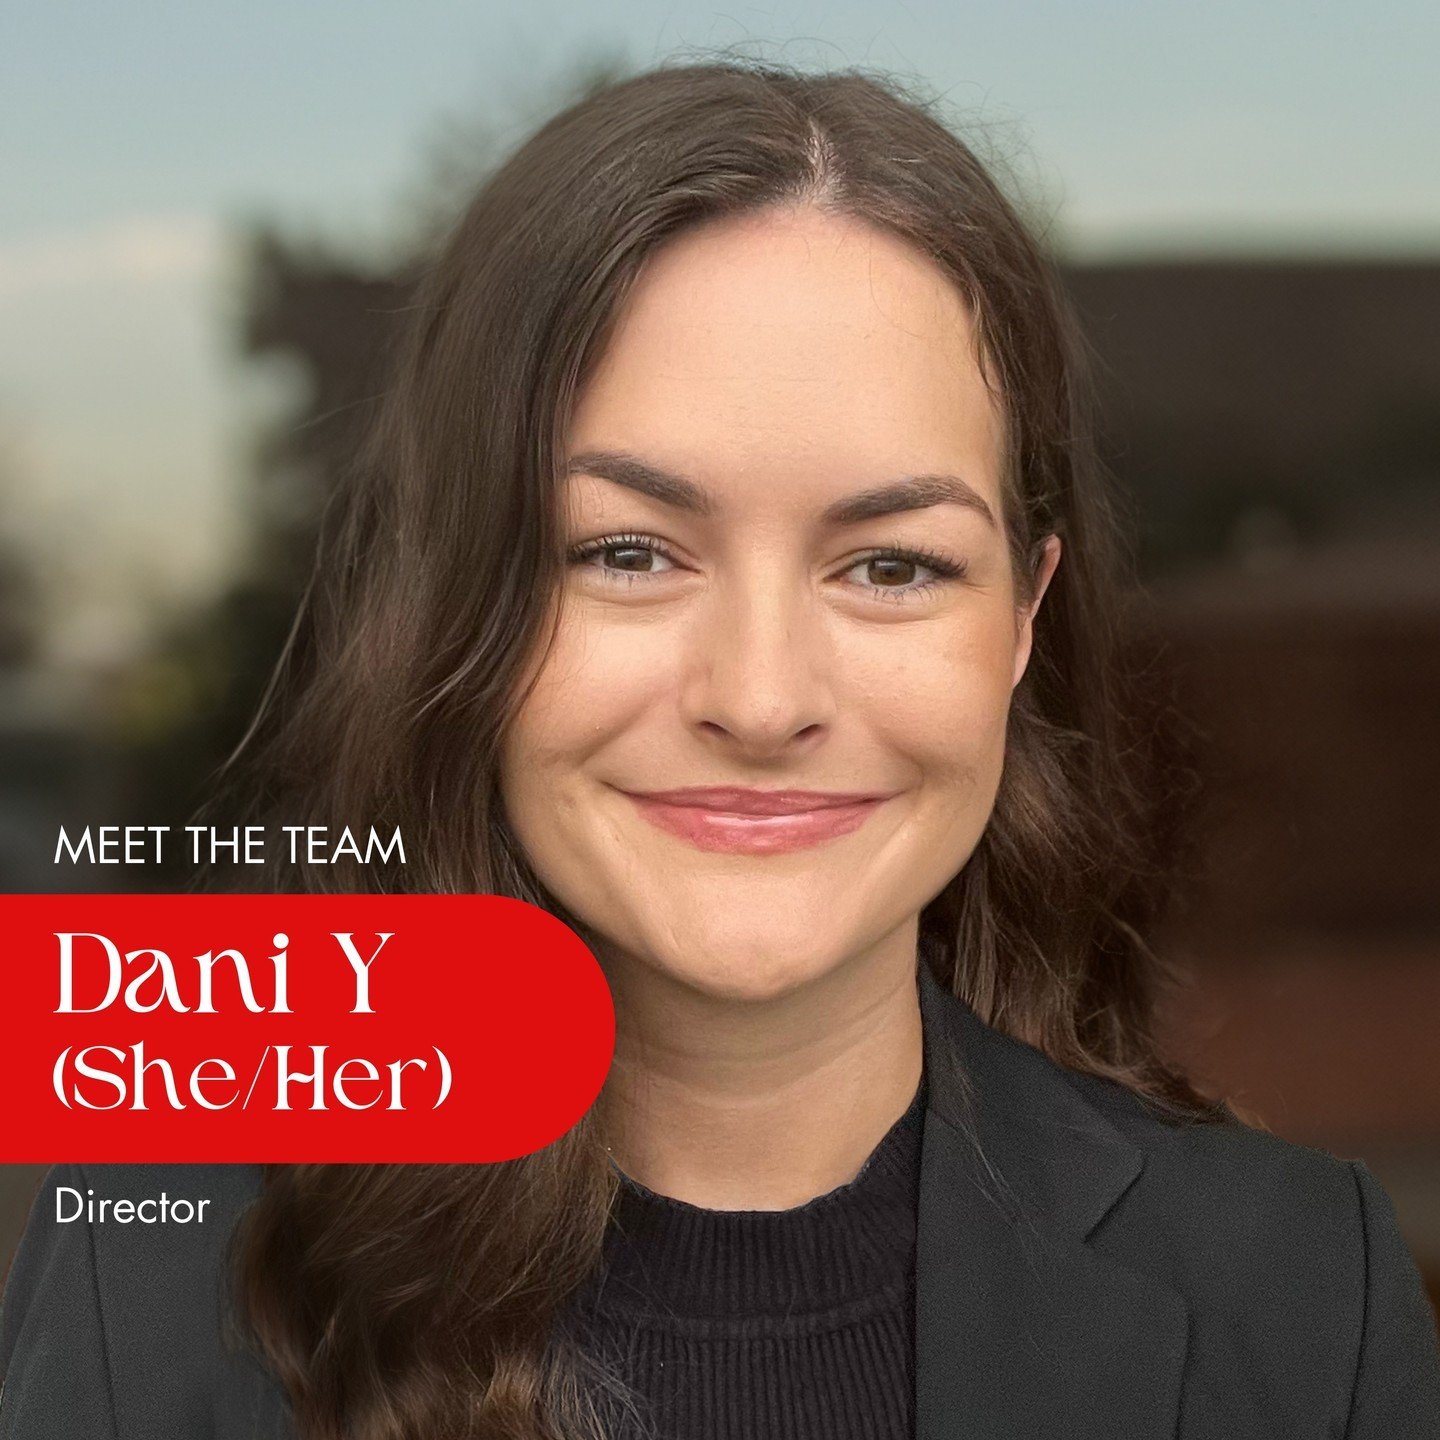 Meet the team- Dani Y, Director!
Danielle is a queer woman, a lawyer and a passionate advocate for LGBTIQ+ rights, with a decade of experience in sectors including law, banking, the not-for-profit sector and the performing arts.

Dani is currently th